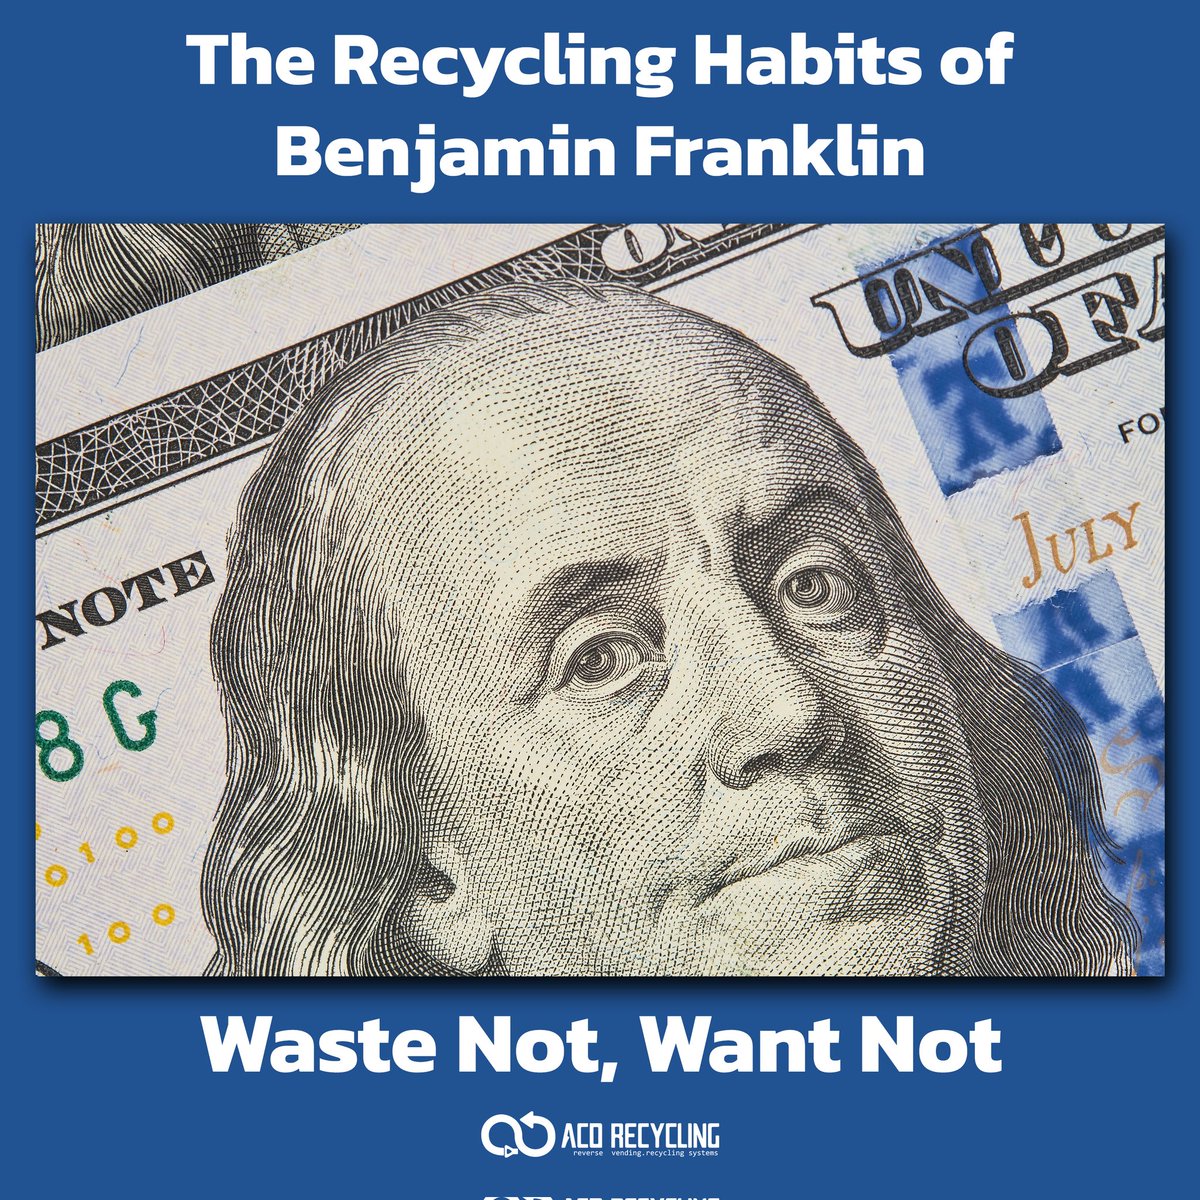 Waste Not, Want Not! The Recycling Habits of Benjamin Franklin ♻️

Benjamin Franklin was way ahead of his time when it came to recycling. Check out our latest blog post to find out more!

#BenjaminFranklin #FoundingFather #AmericanRevolution #BenFranklinQuotes #History